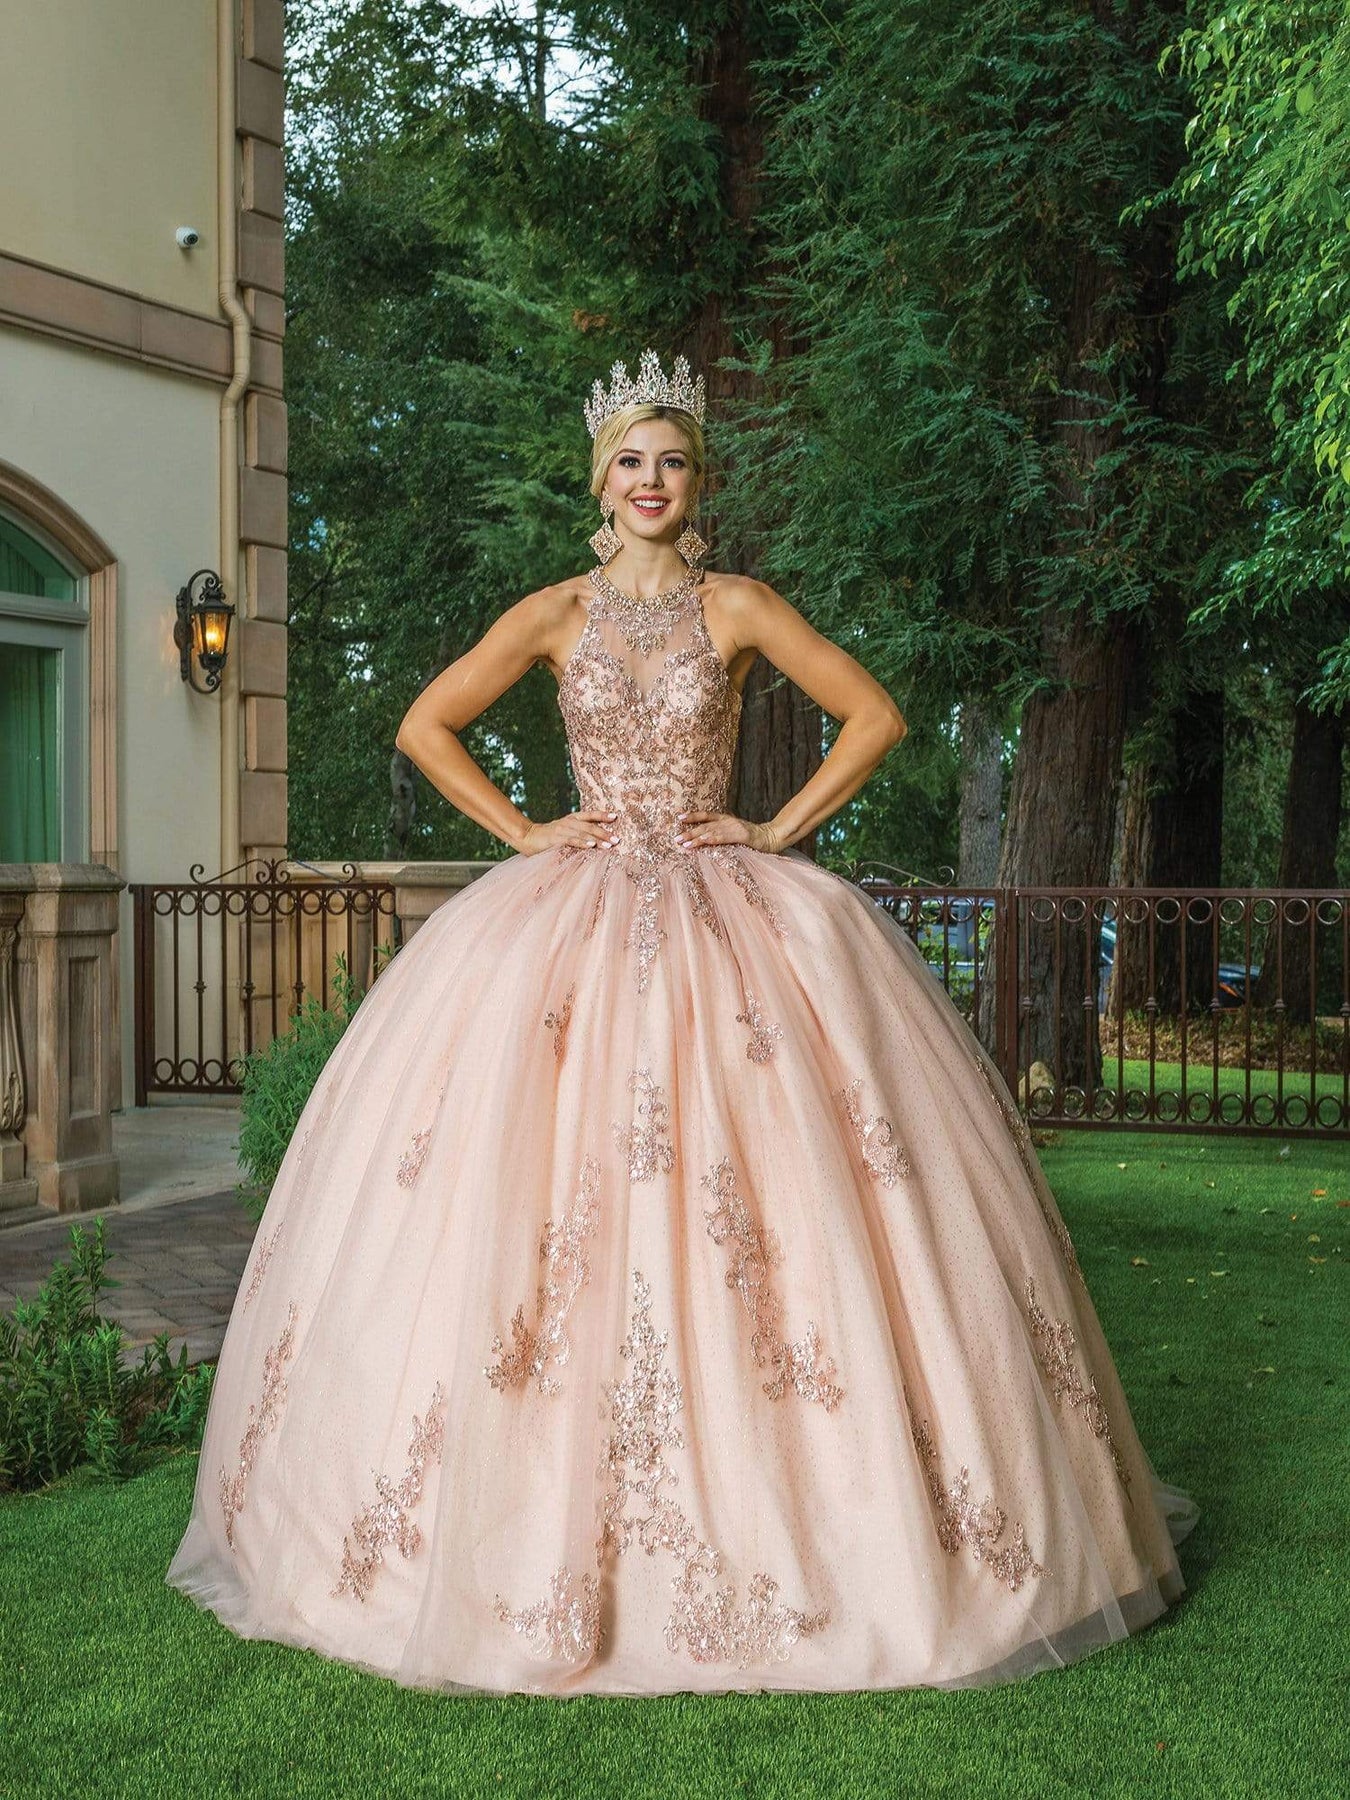 Dancing Queen - 1628 Halter Neck Embellished Ballgown Special Occasion Dress In Pink and Gold